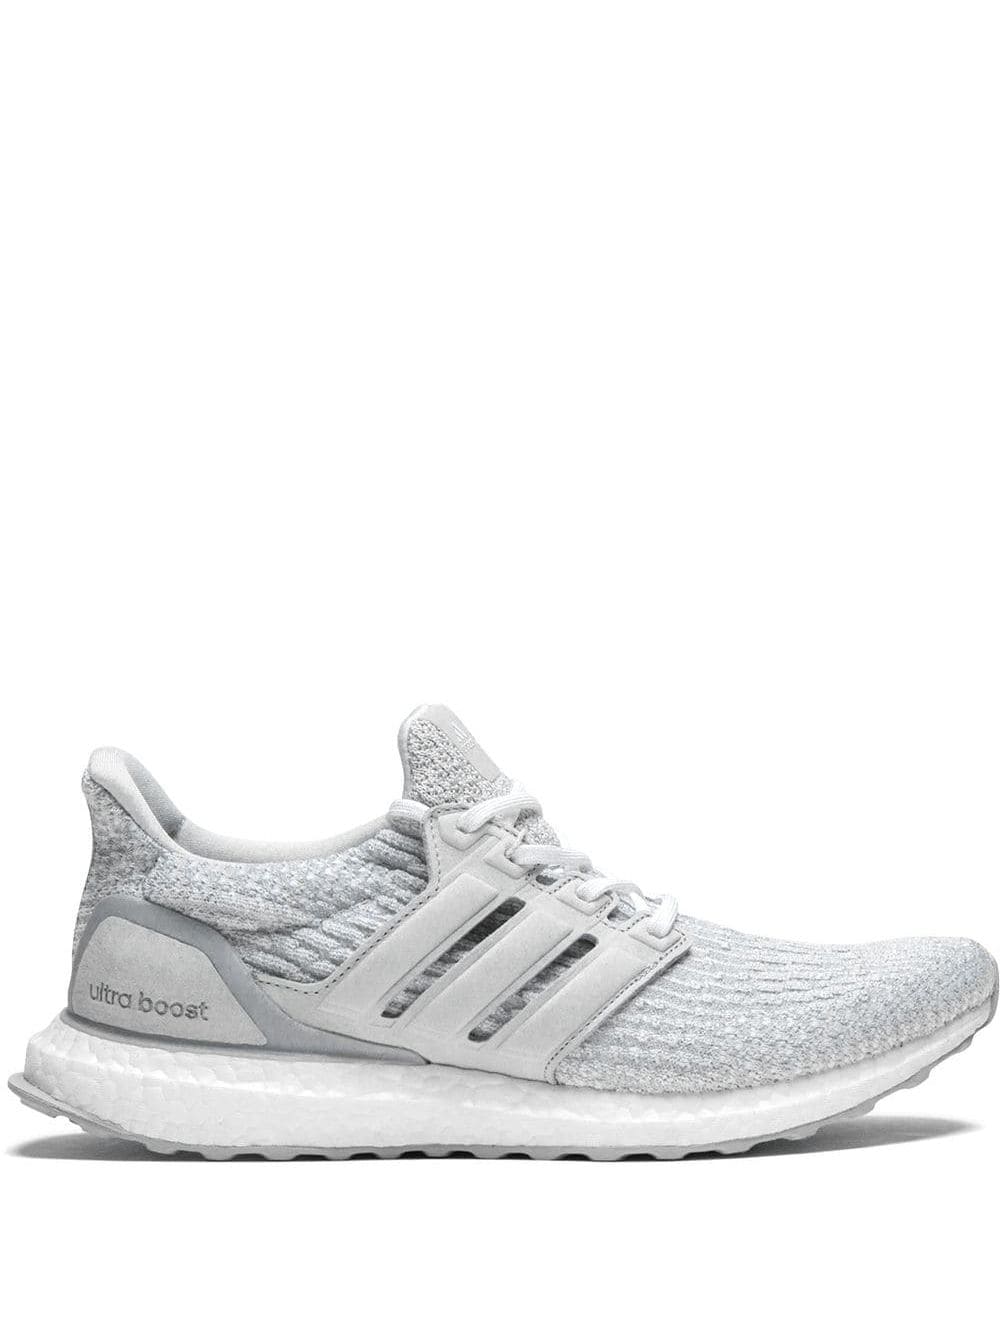 reigning champ ultraboost